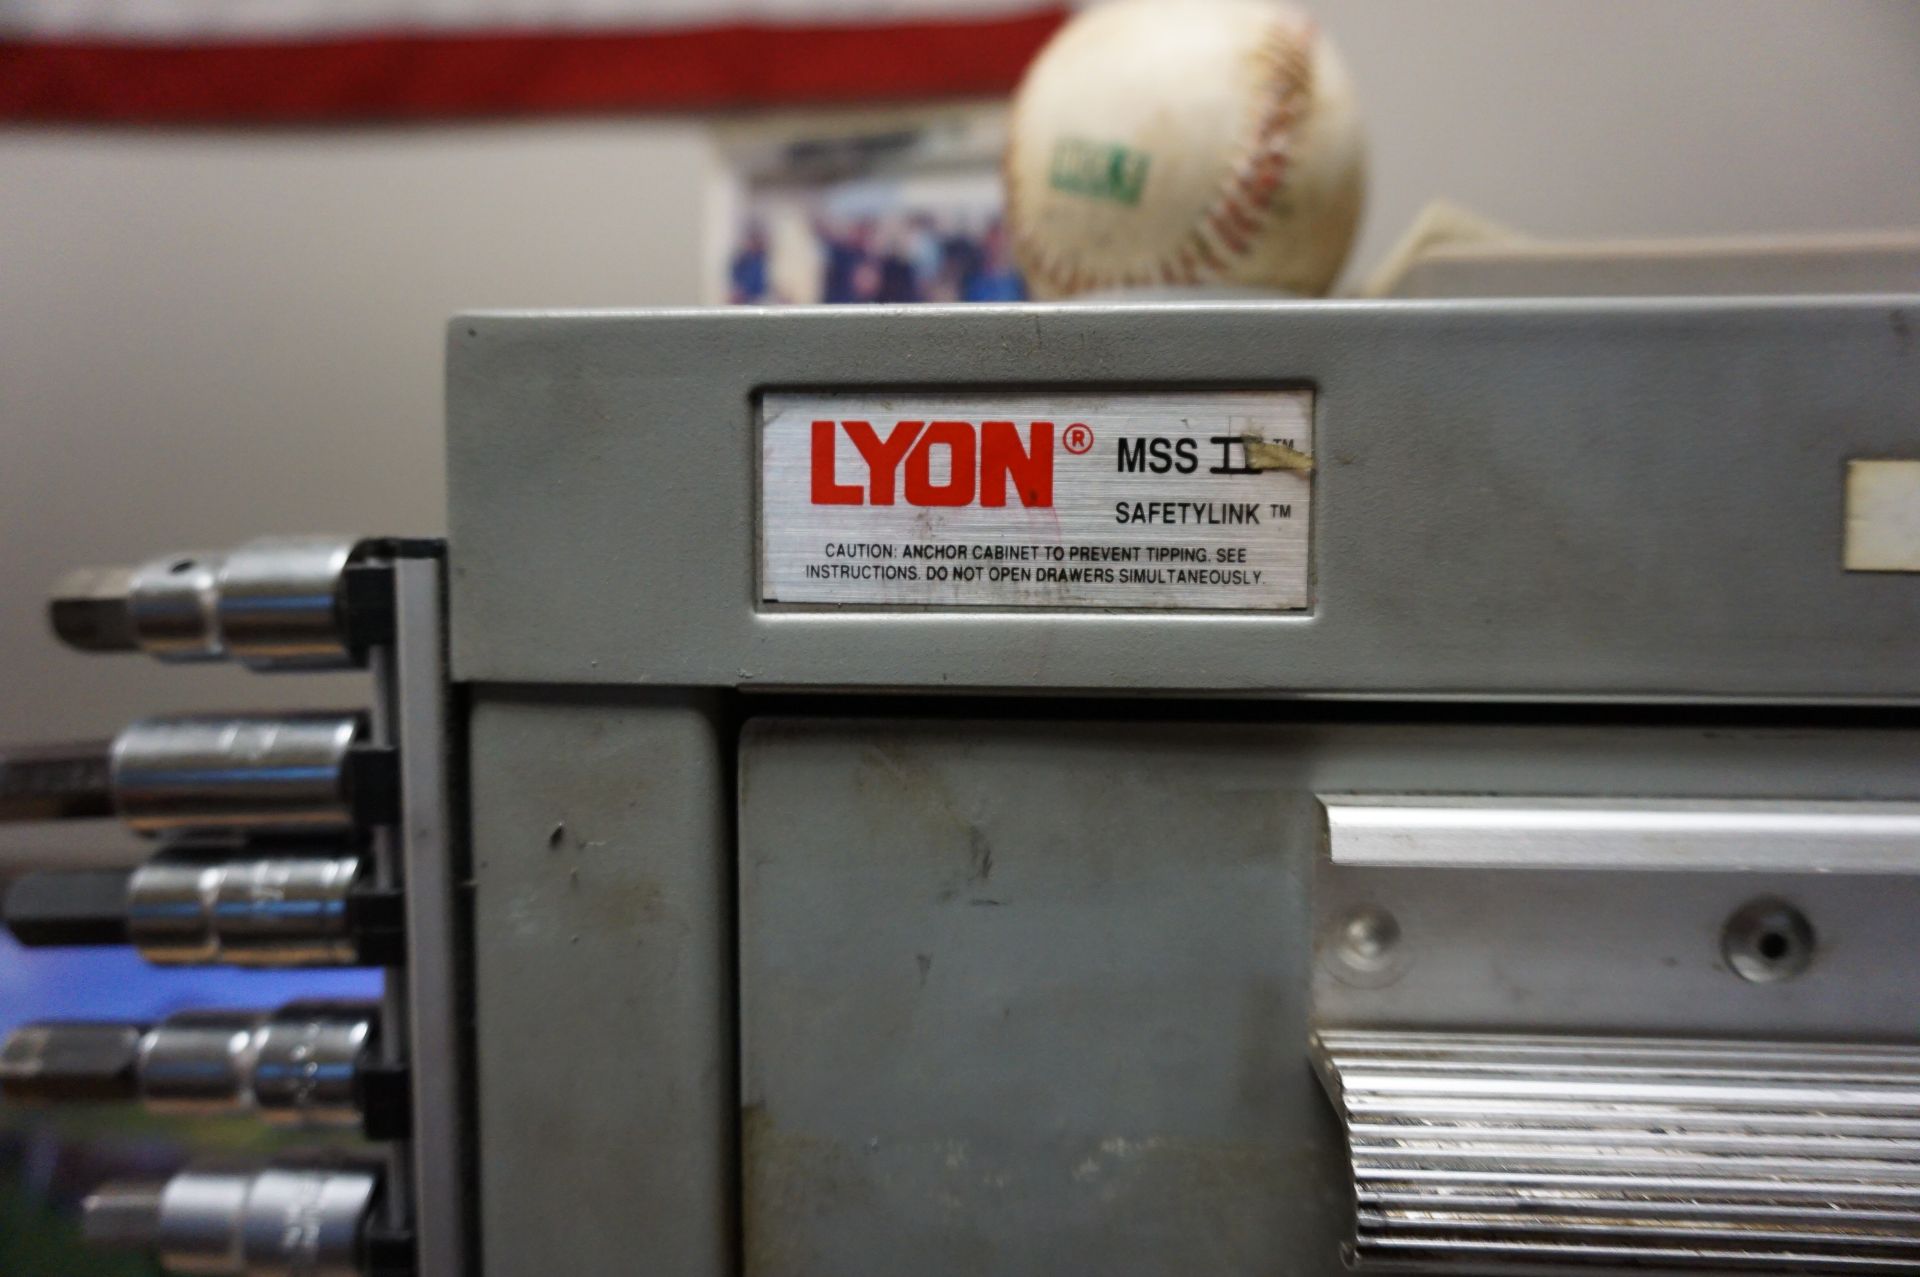 LYON MSS II SAFETY LINK 10 DRAWER INDUSTRIAL HEAVY DUTY STEEL CABINET *NO CONTENTS* - Image 2 of 2